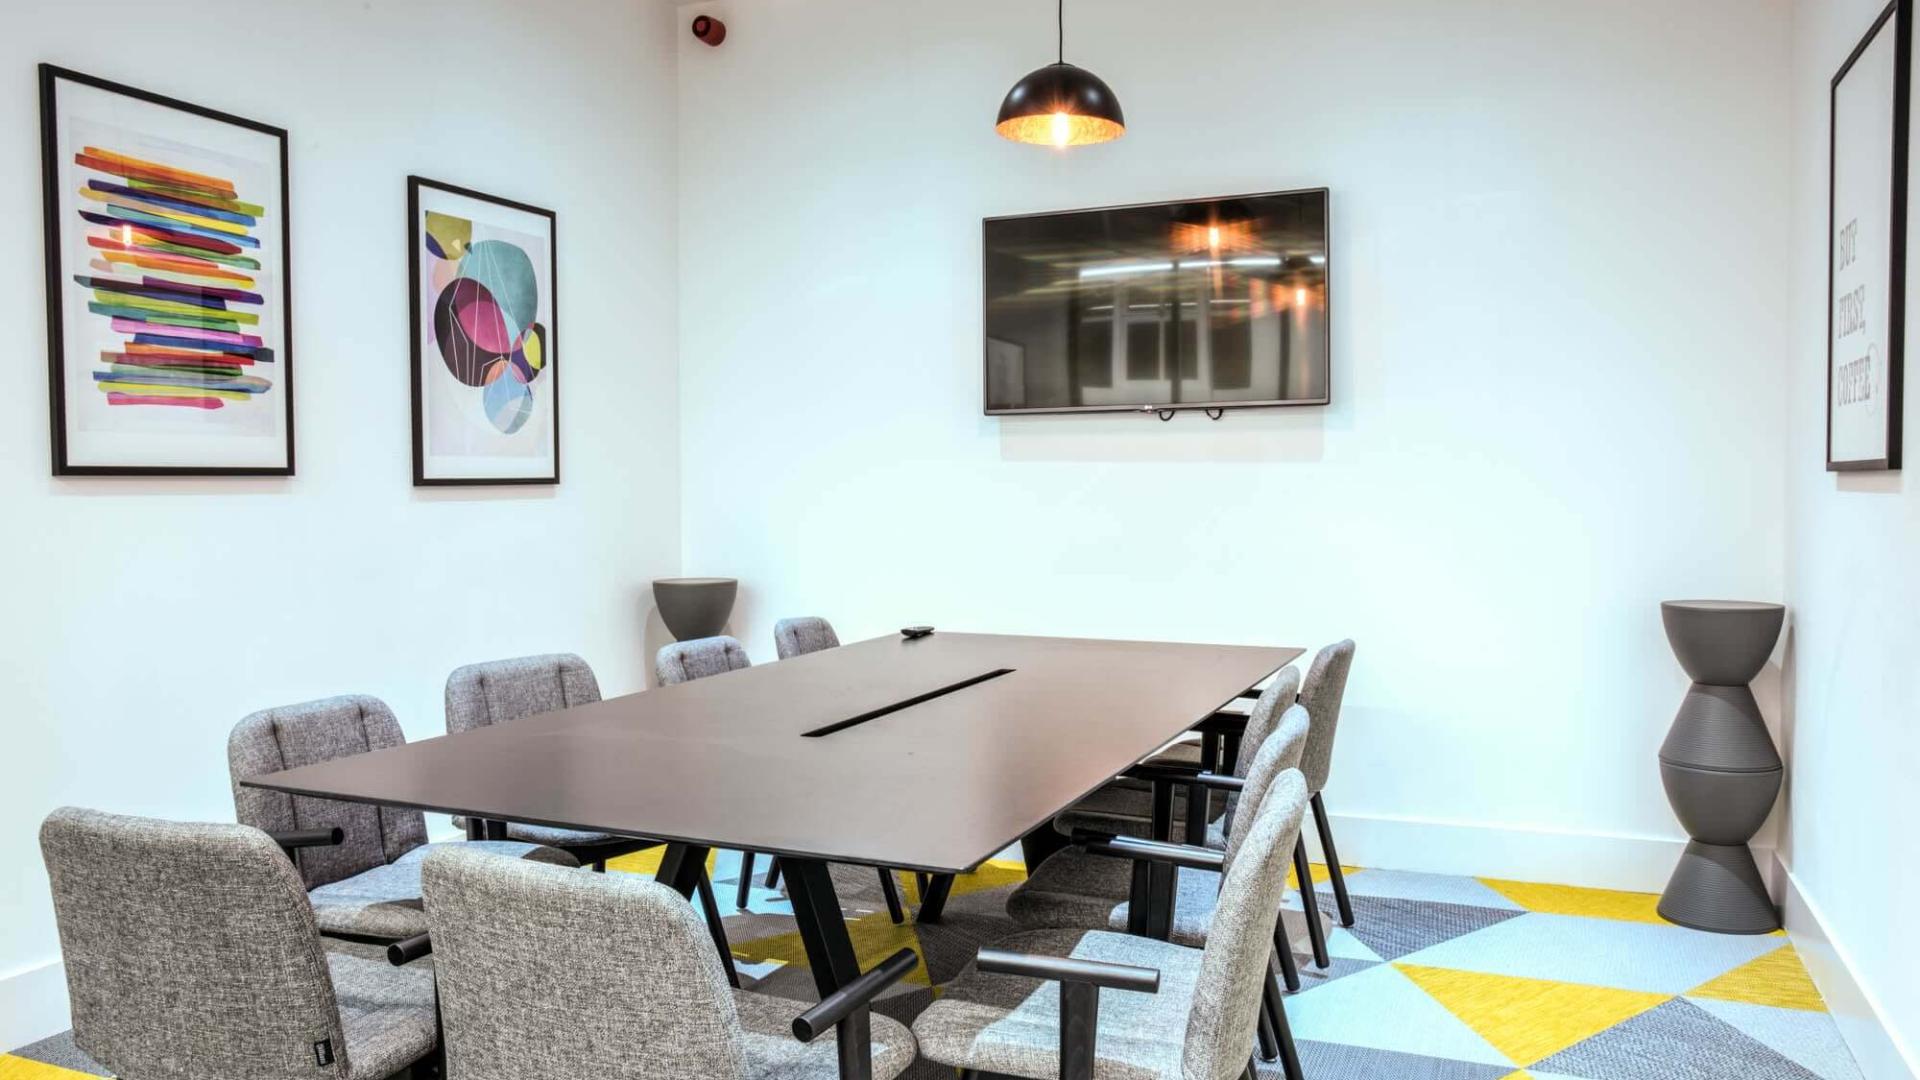 Meeting Rooms for Hire in Enfield, London